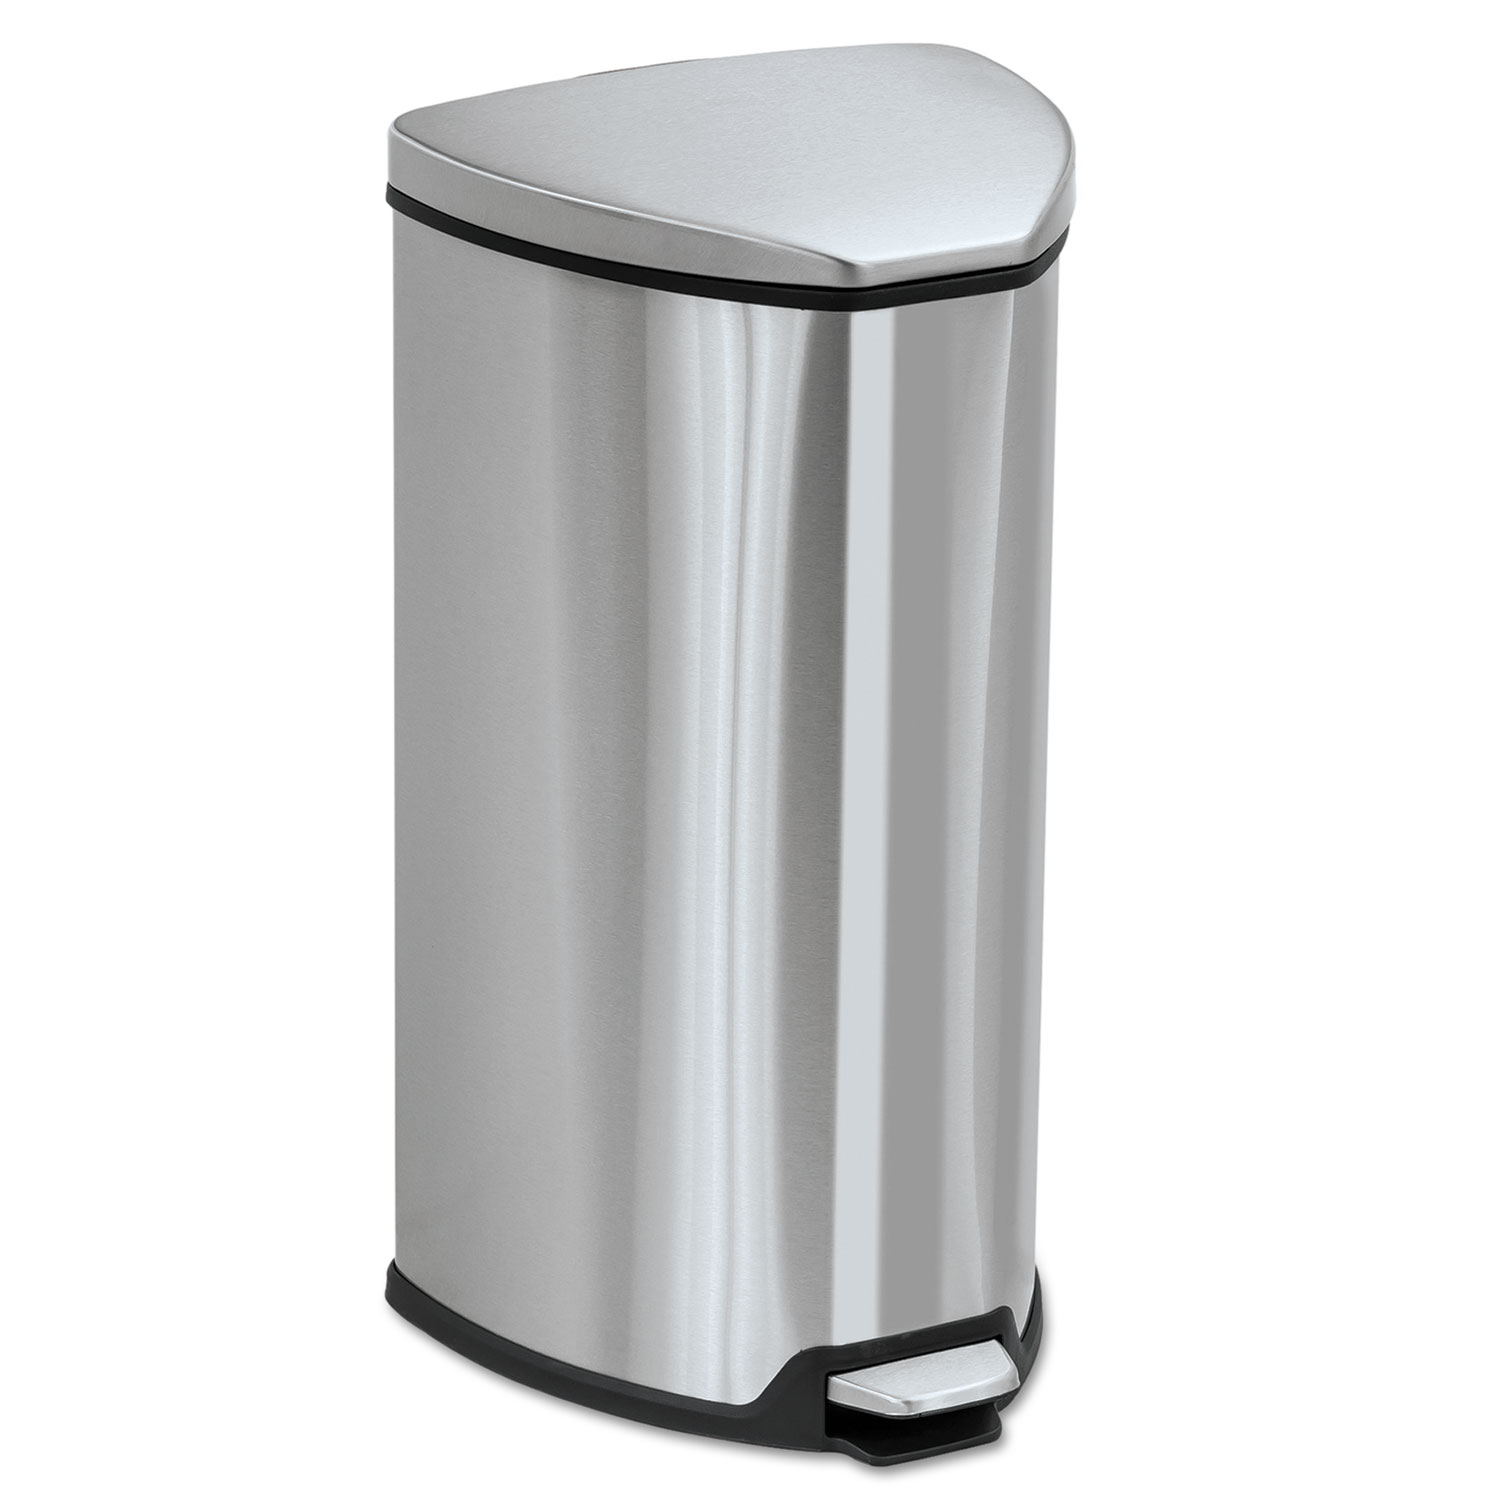  Safco 9686SS Step-On Waste Receptacle, Triangular, Stainless Steel, 7 gal, Chrome/Black (SAF9686SS) 